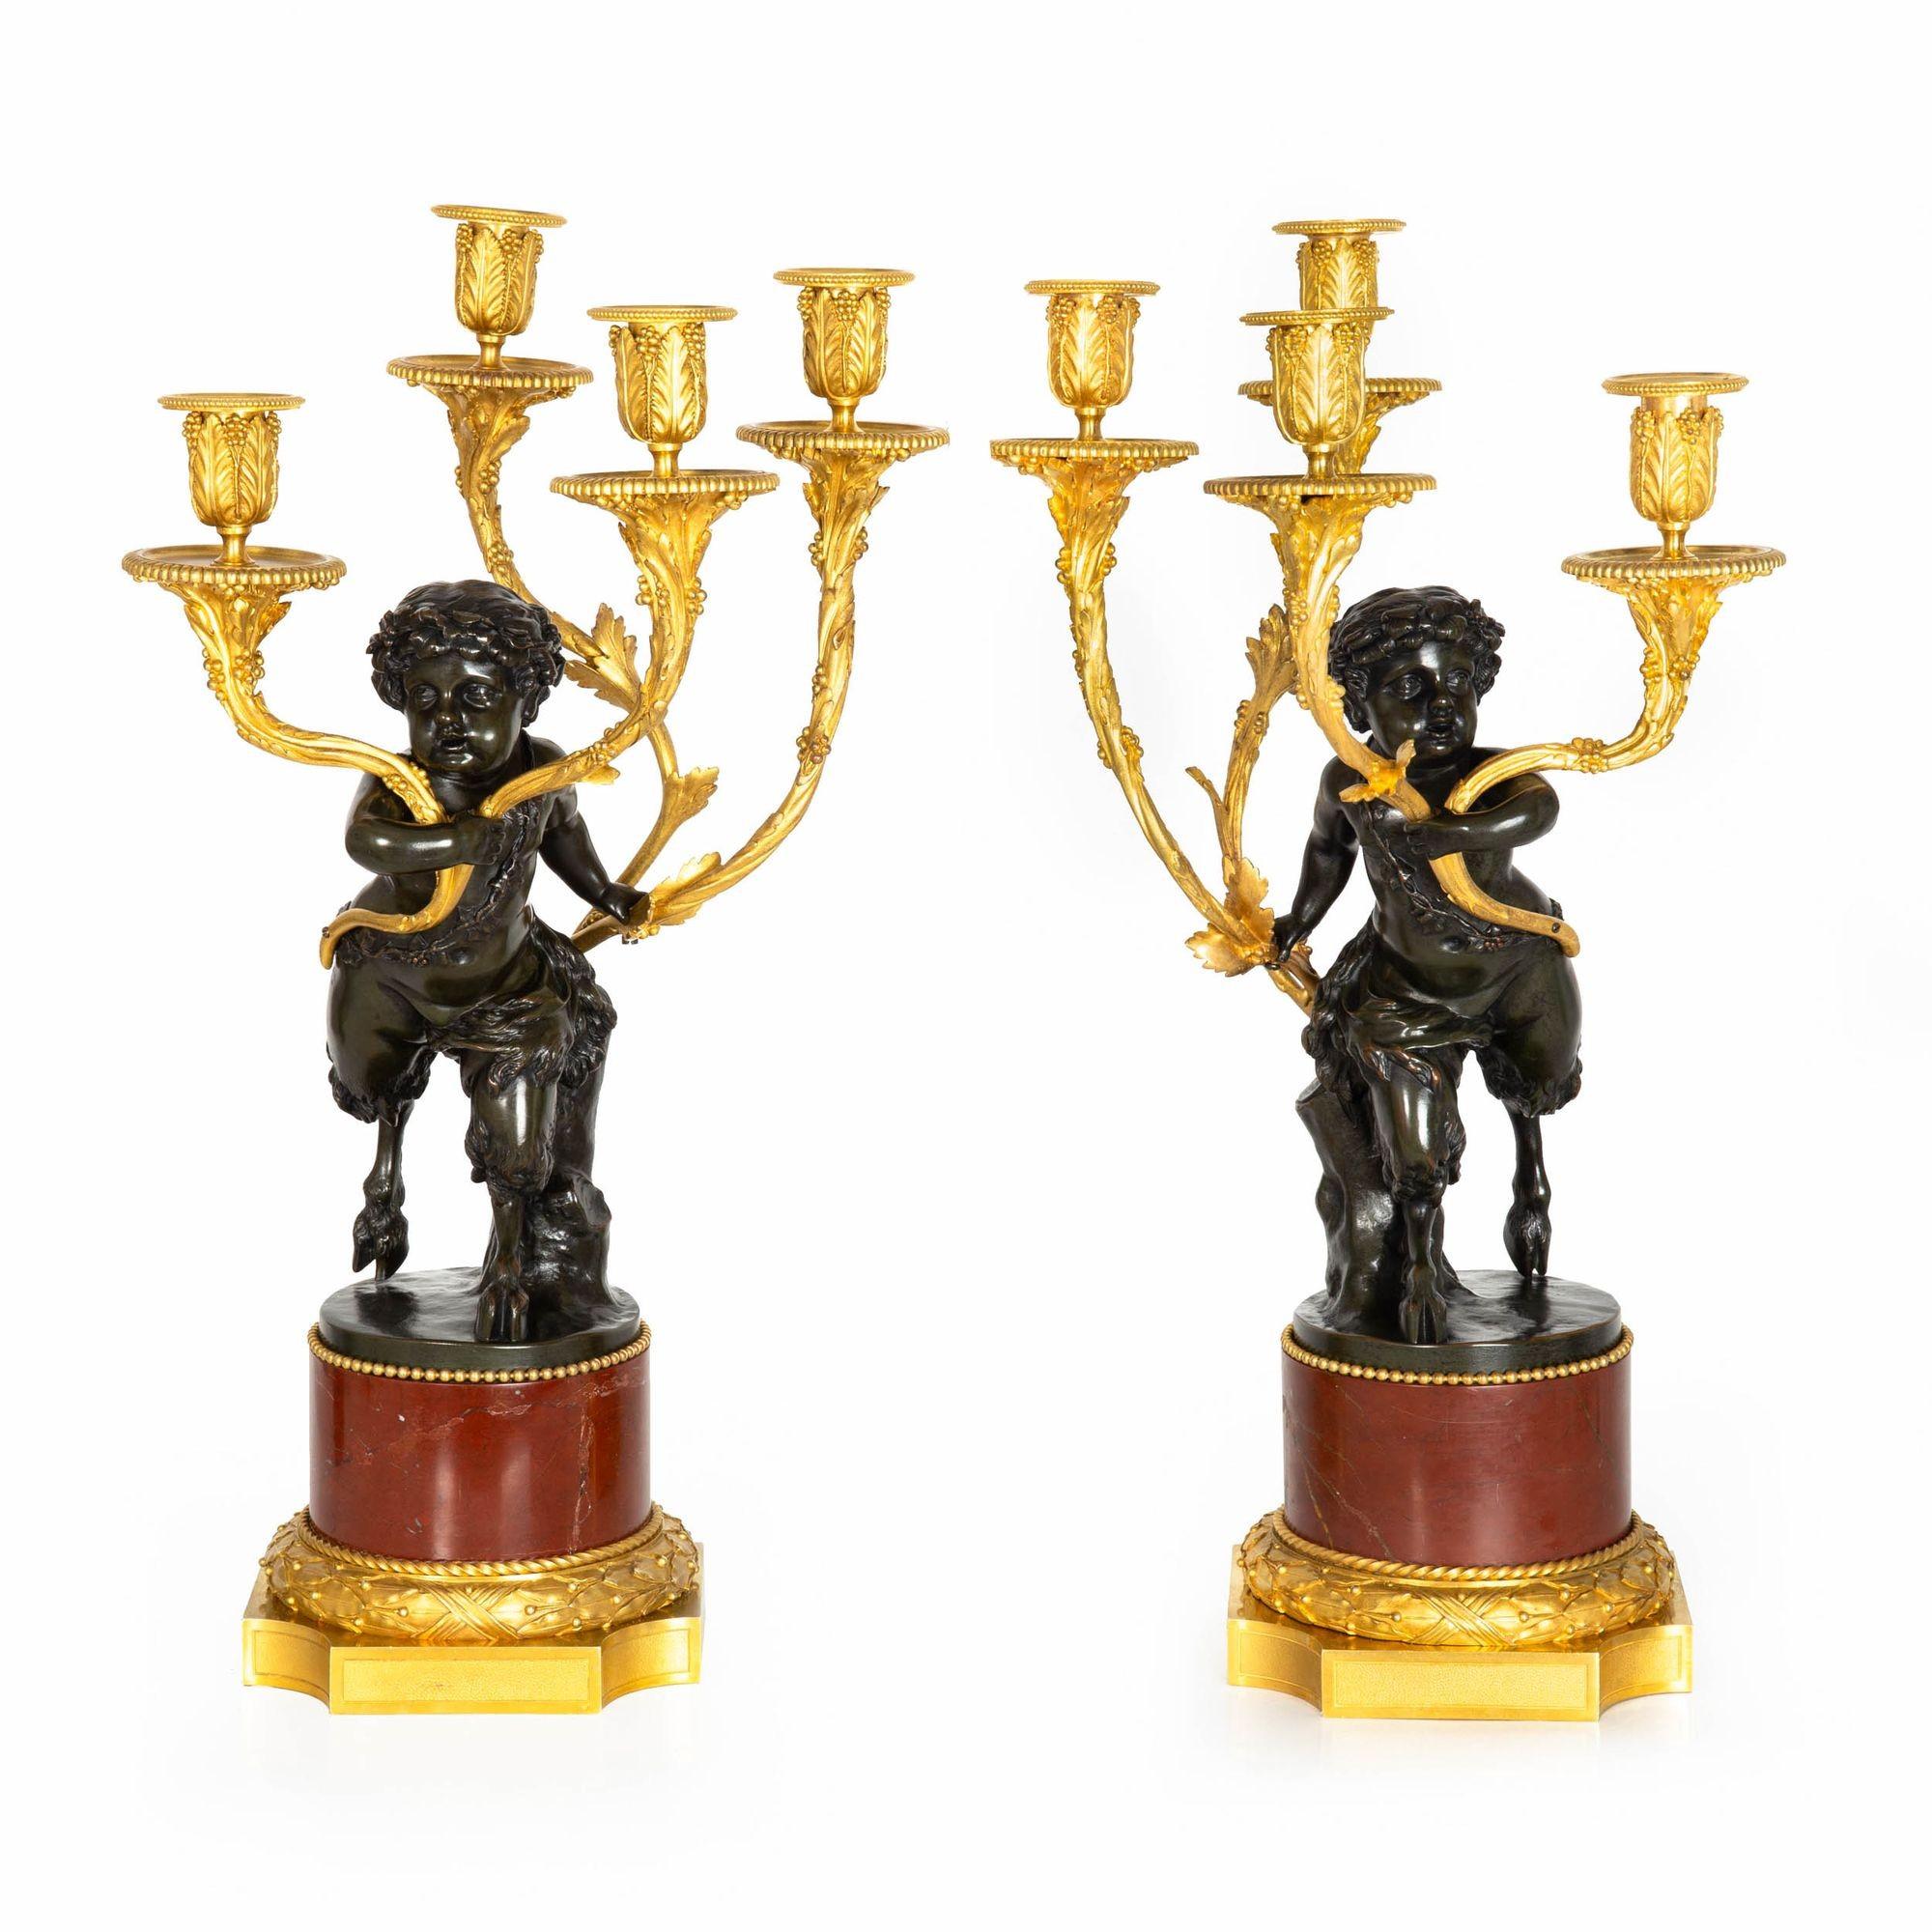 VERY FINE PAIR OF CANDELABRA WITH SATYR PUTTO EACH RAISING FOUR-LIGHTS
Cast by Henry Dasson after the original models by Claude Michel known as Clodion  gilt and patinated bronze over rouge marble plinth  signed to the edge of rim on each 